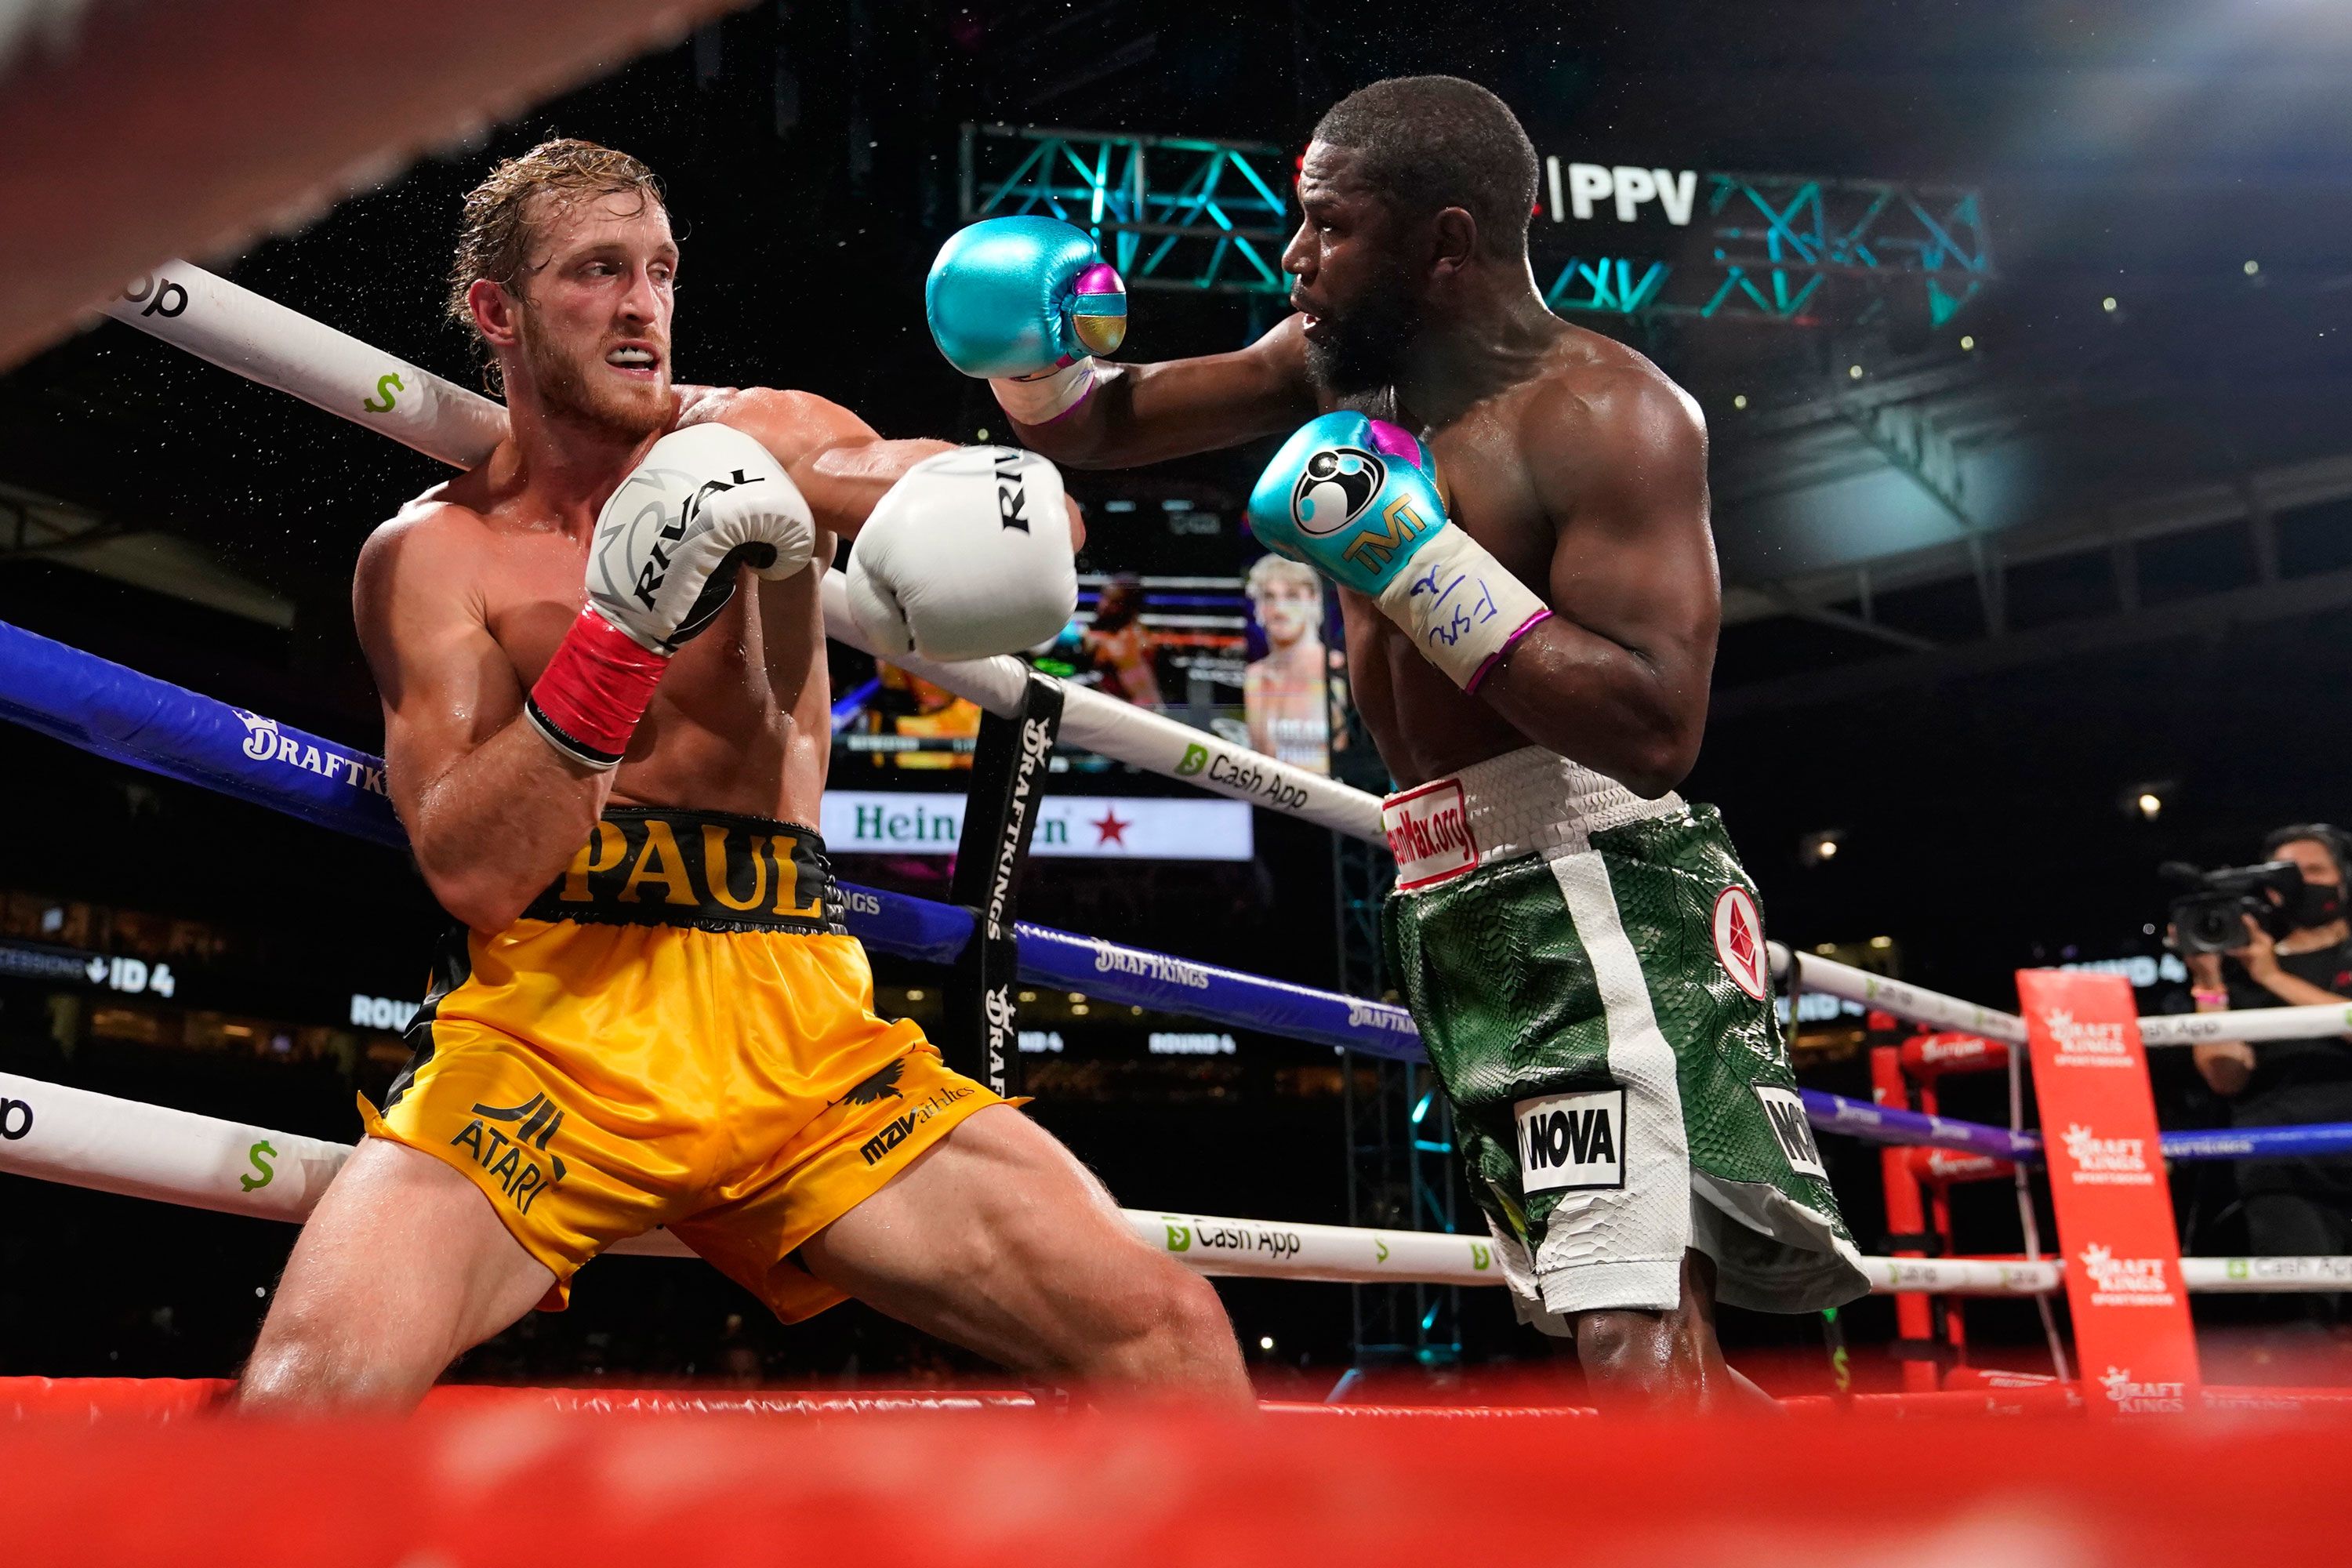 Jake Paul claims Floyd Mayweather is “ruining his legacy”, sets conditions  for fight - Dexerto